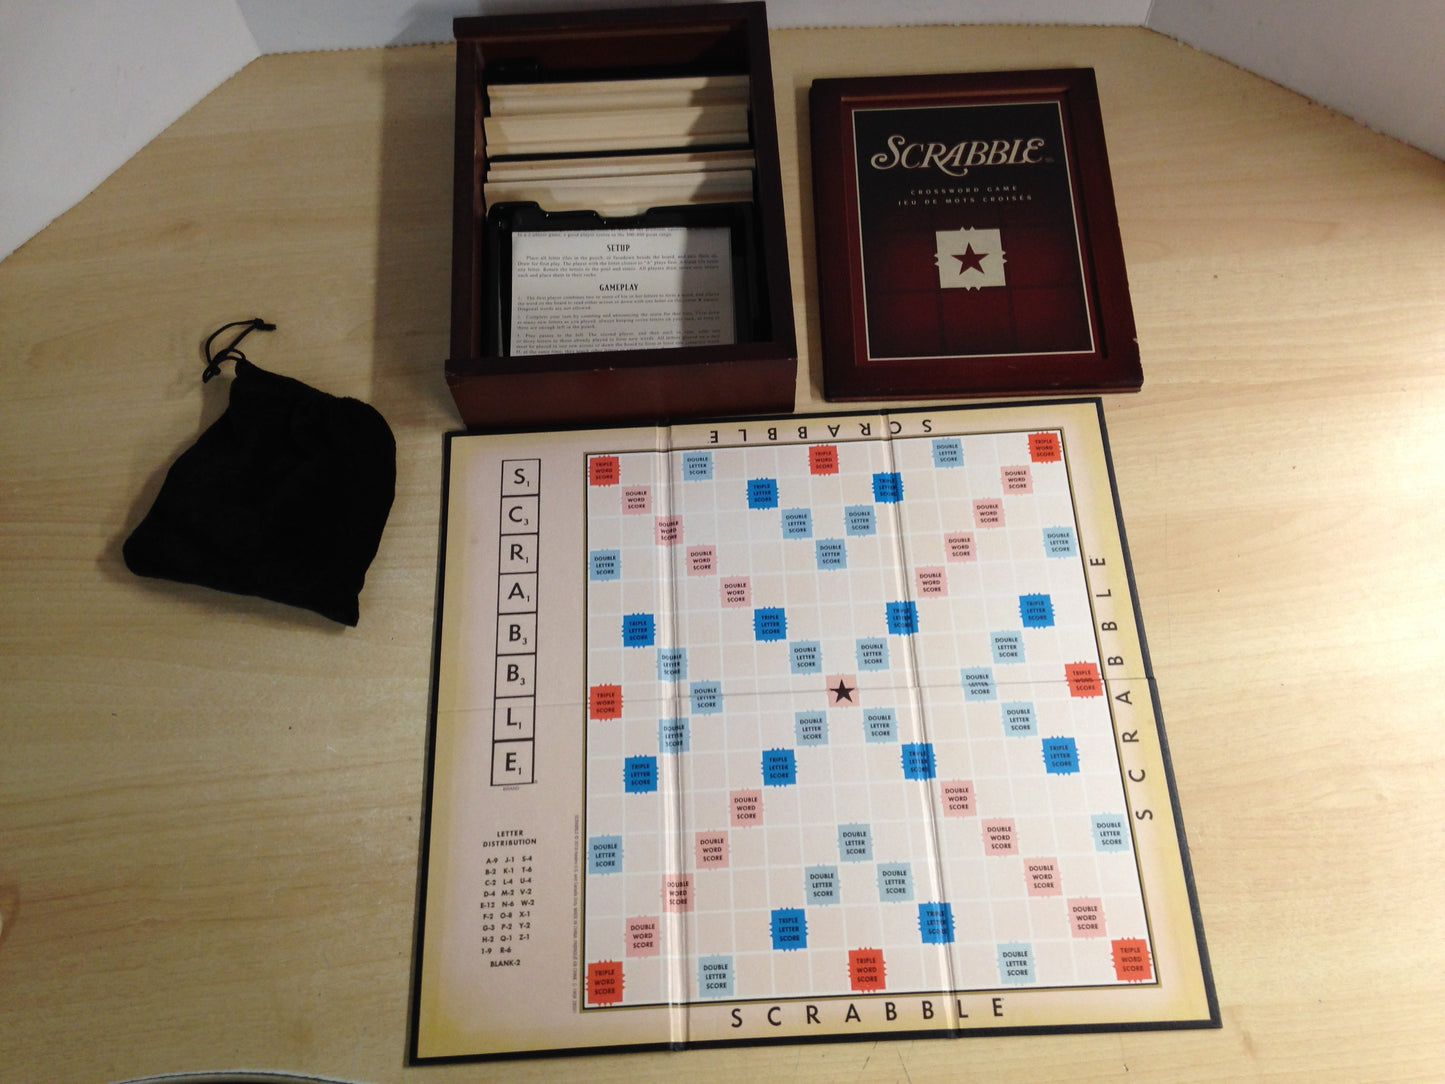 Game Scrabble Wood and Wood Case As New Complete Excellent